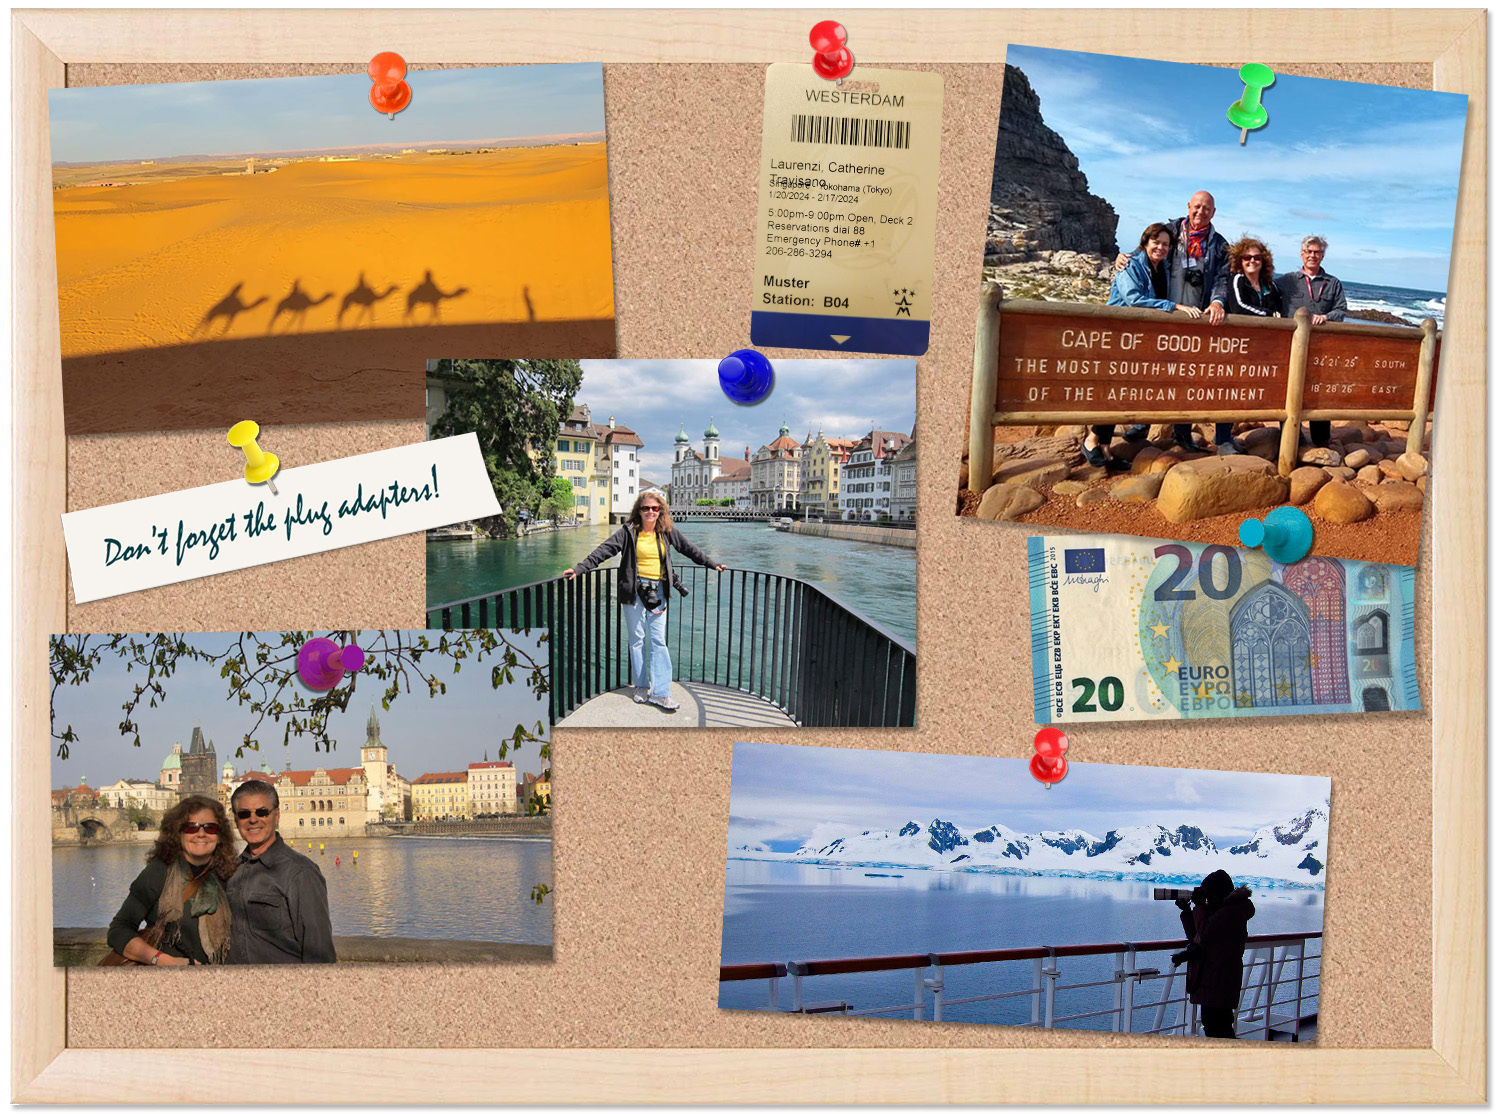 A corkboard with photos and other travel related items attached